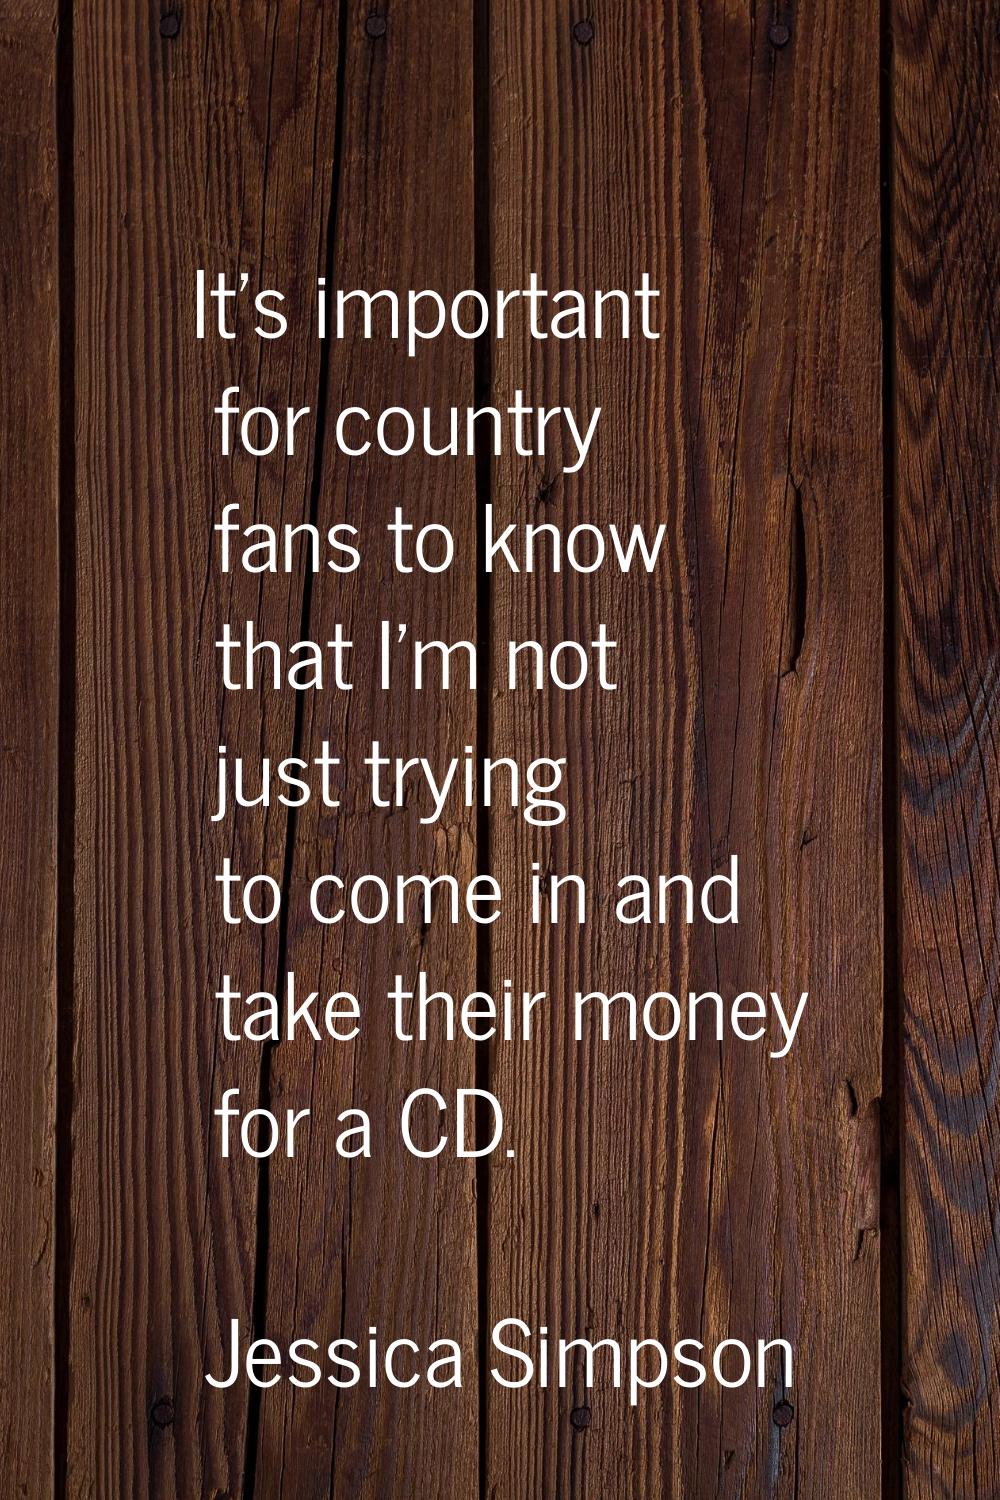 It's important for country fans to know that I'm not just trying to come in and take their money fo